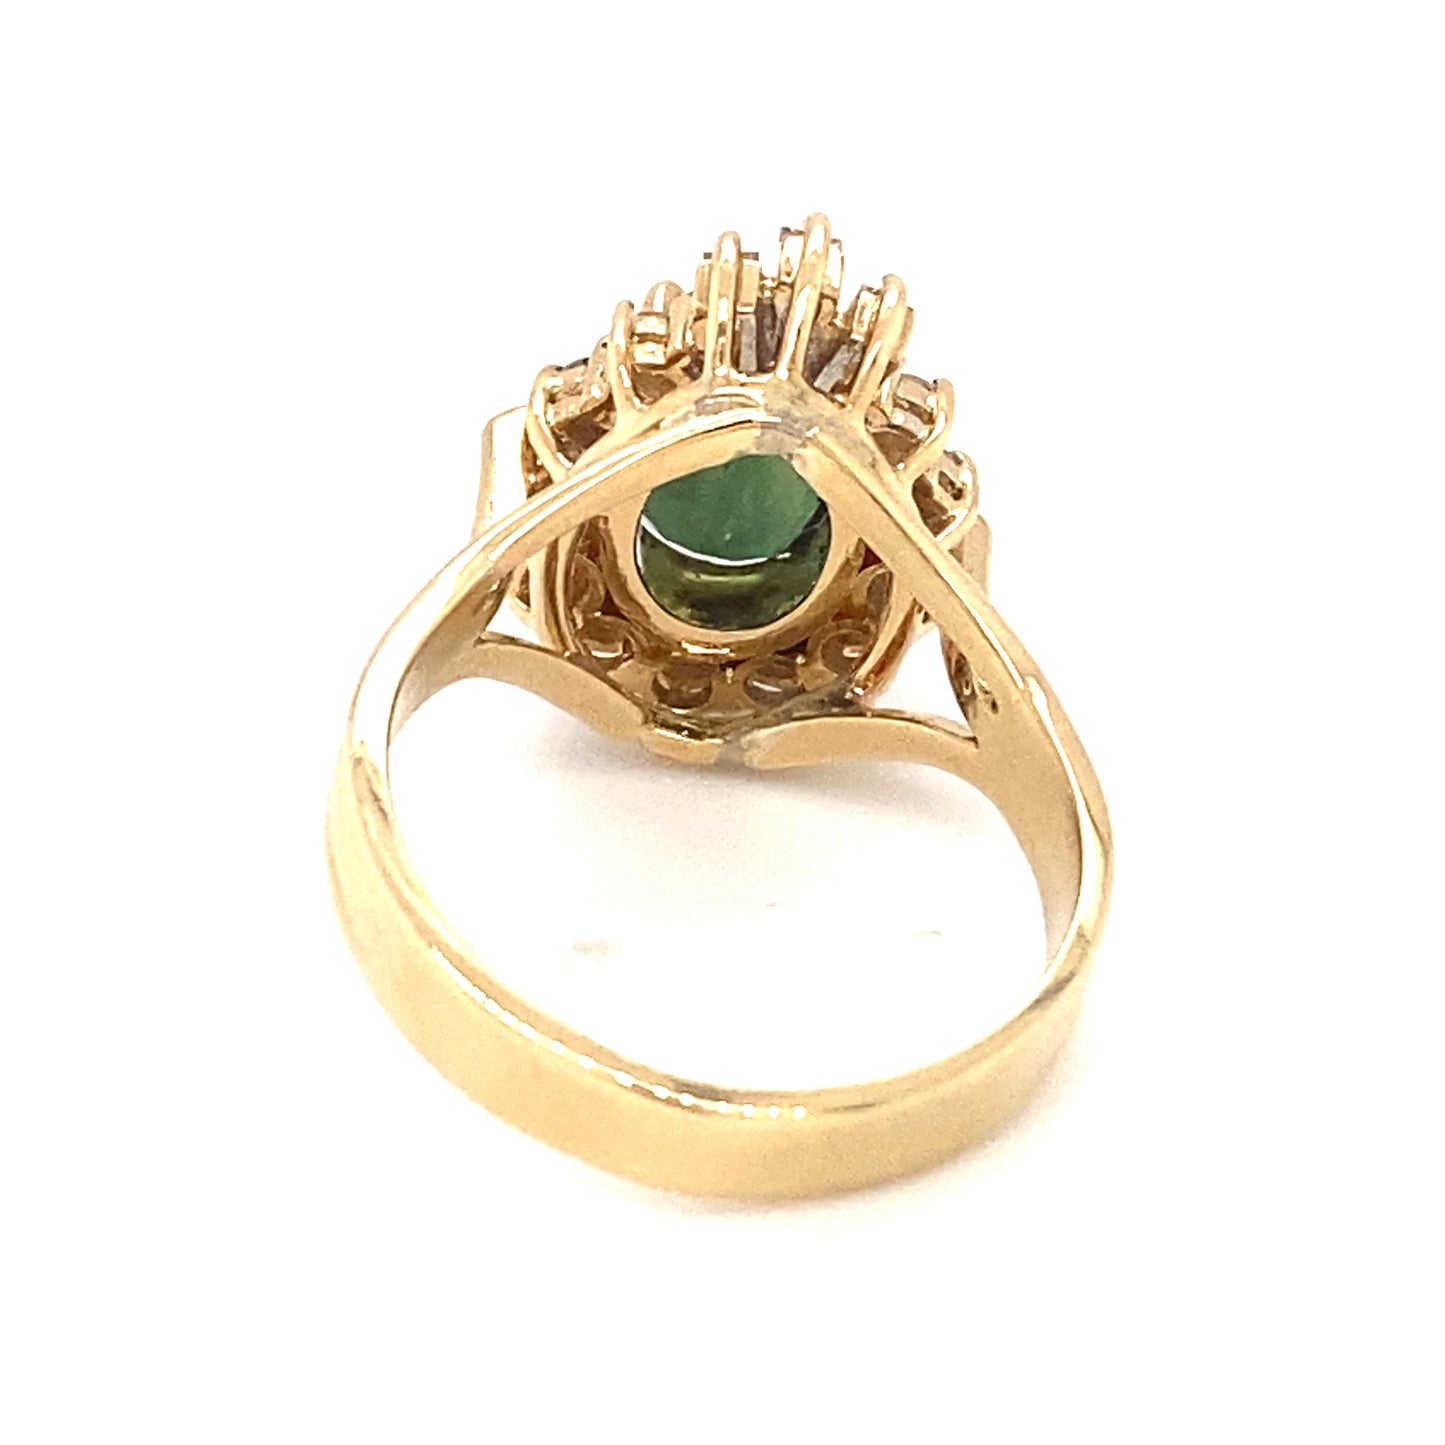 Le Vian Green Sapphire and Diamond Engagement Ring in 18K Gold